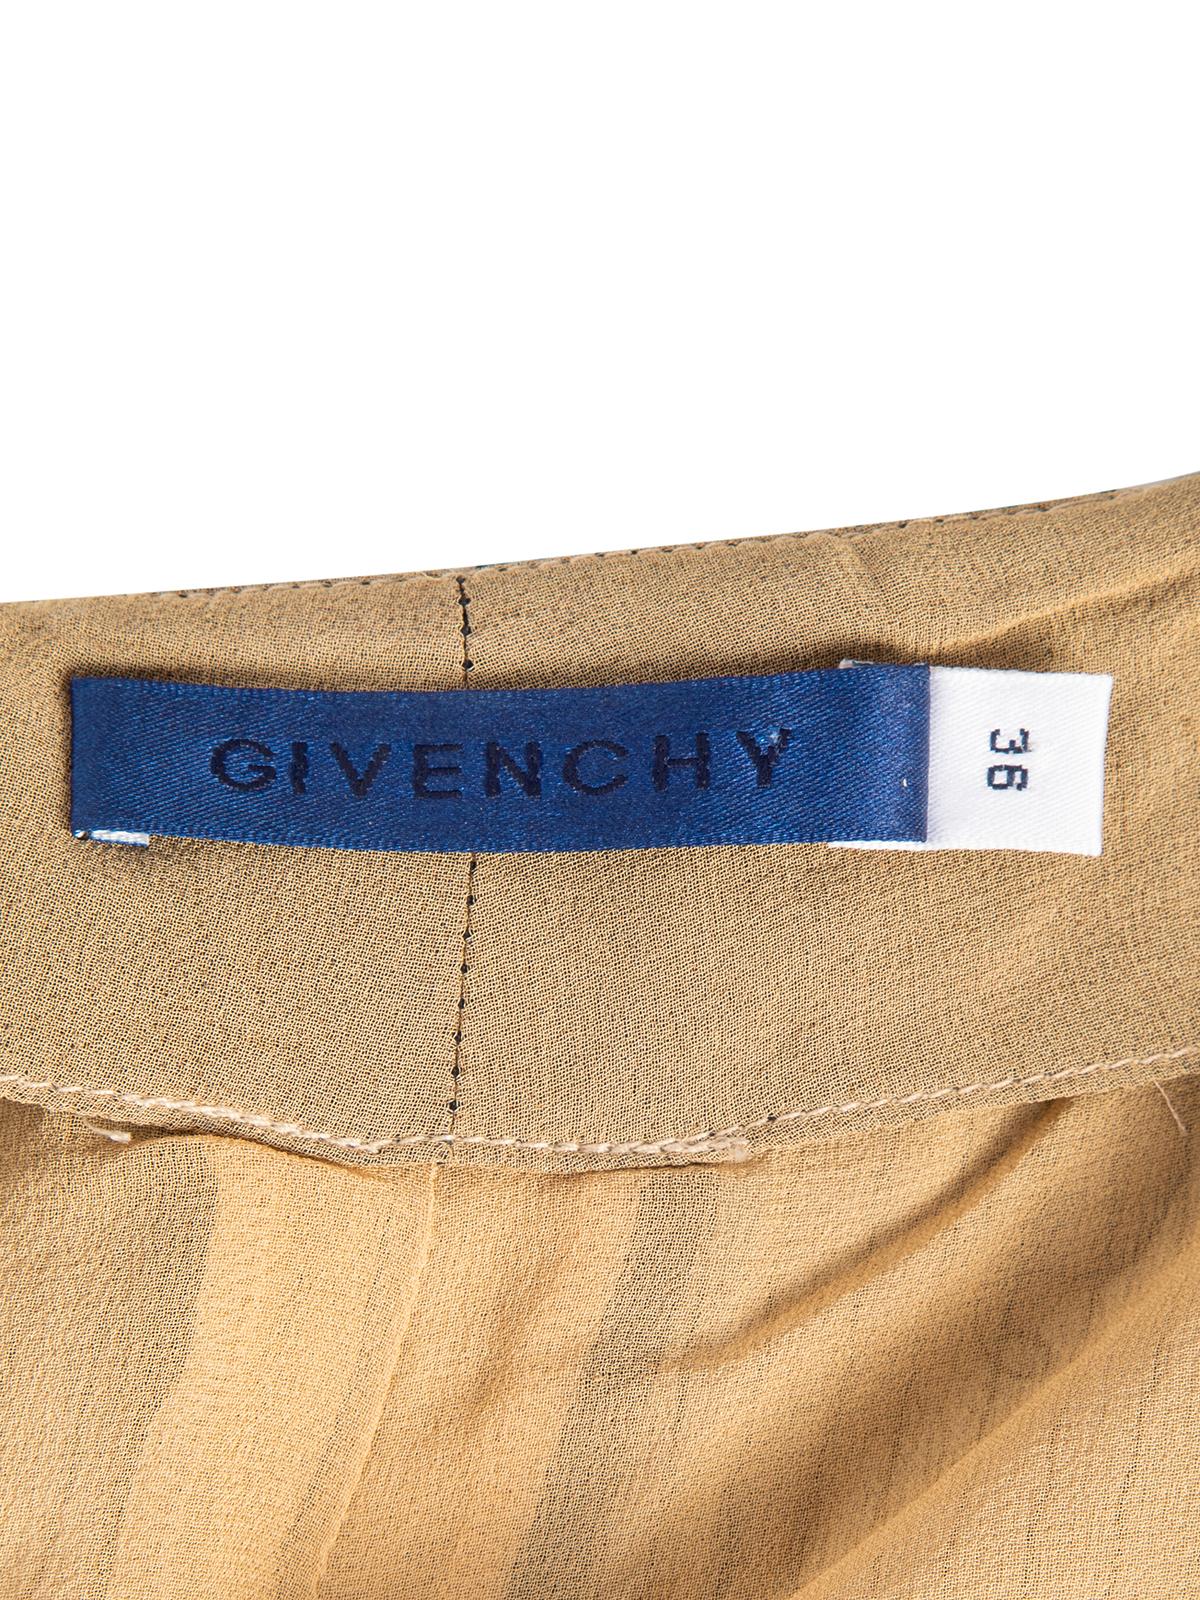 Pre-Loved Givenchy Women's Glitter Trousers In Excellent Condition In London, GB